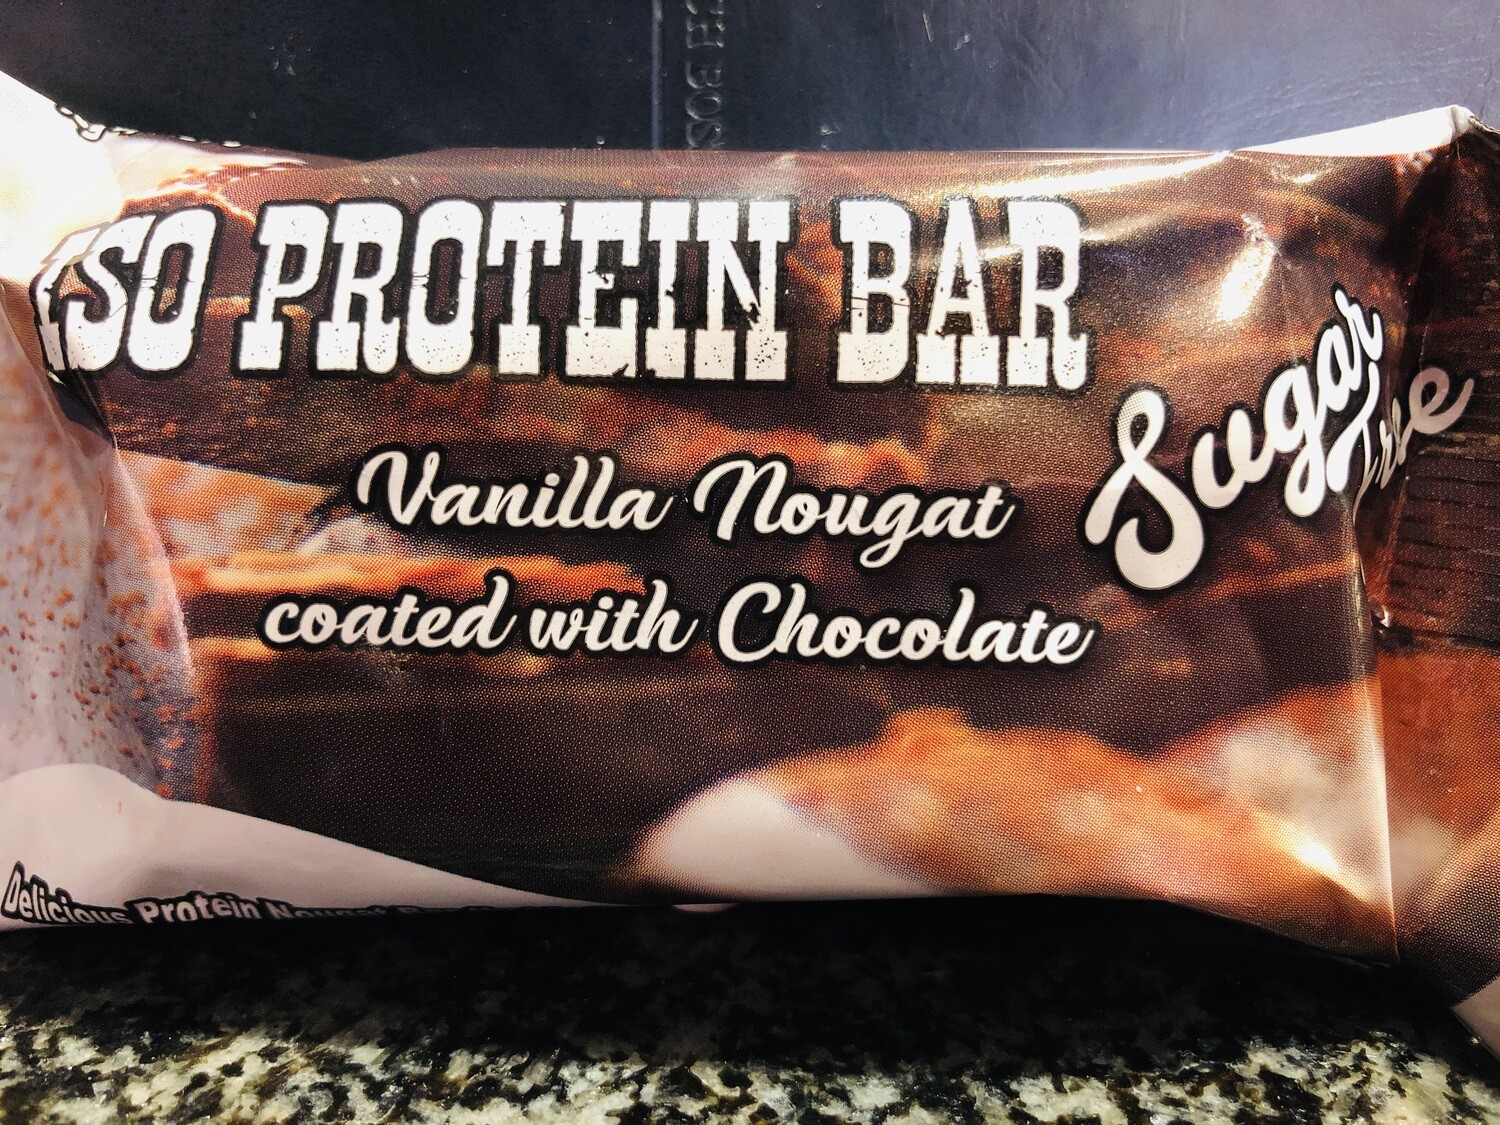 Nougat Protein Bar - Vanilla rolled with Chocolate